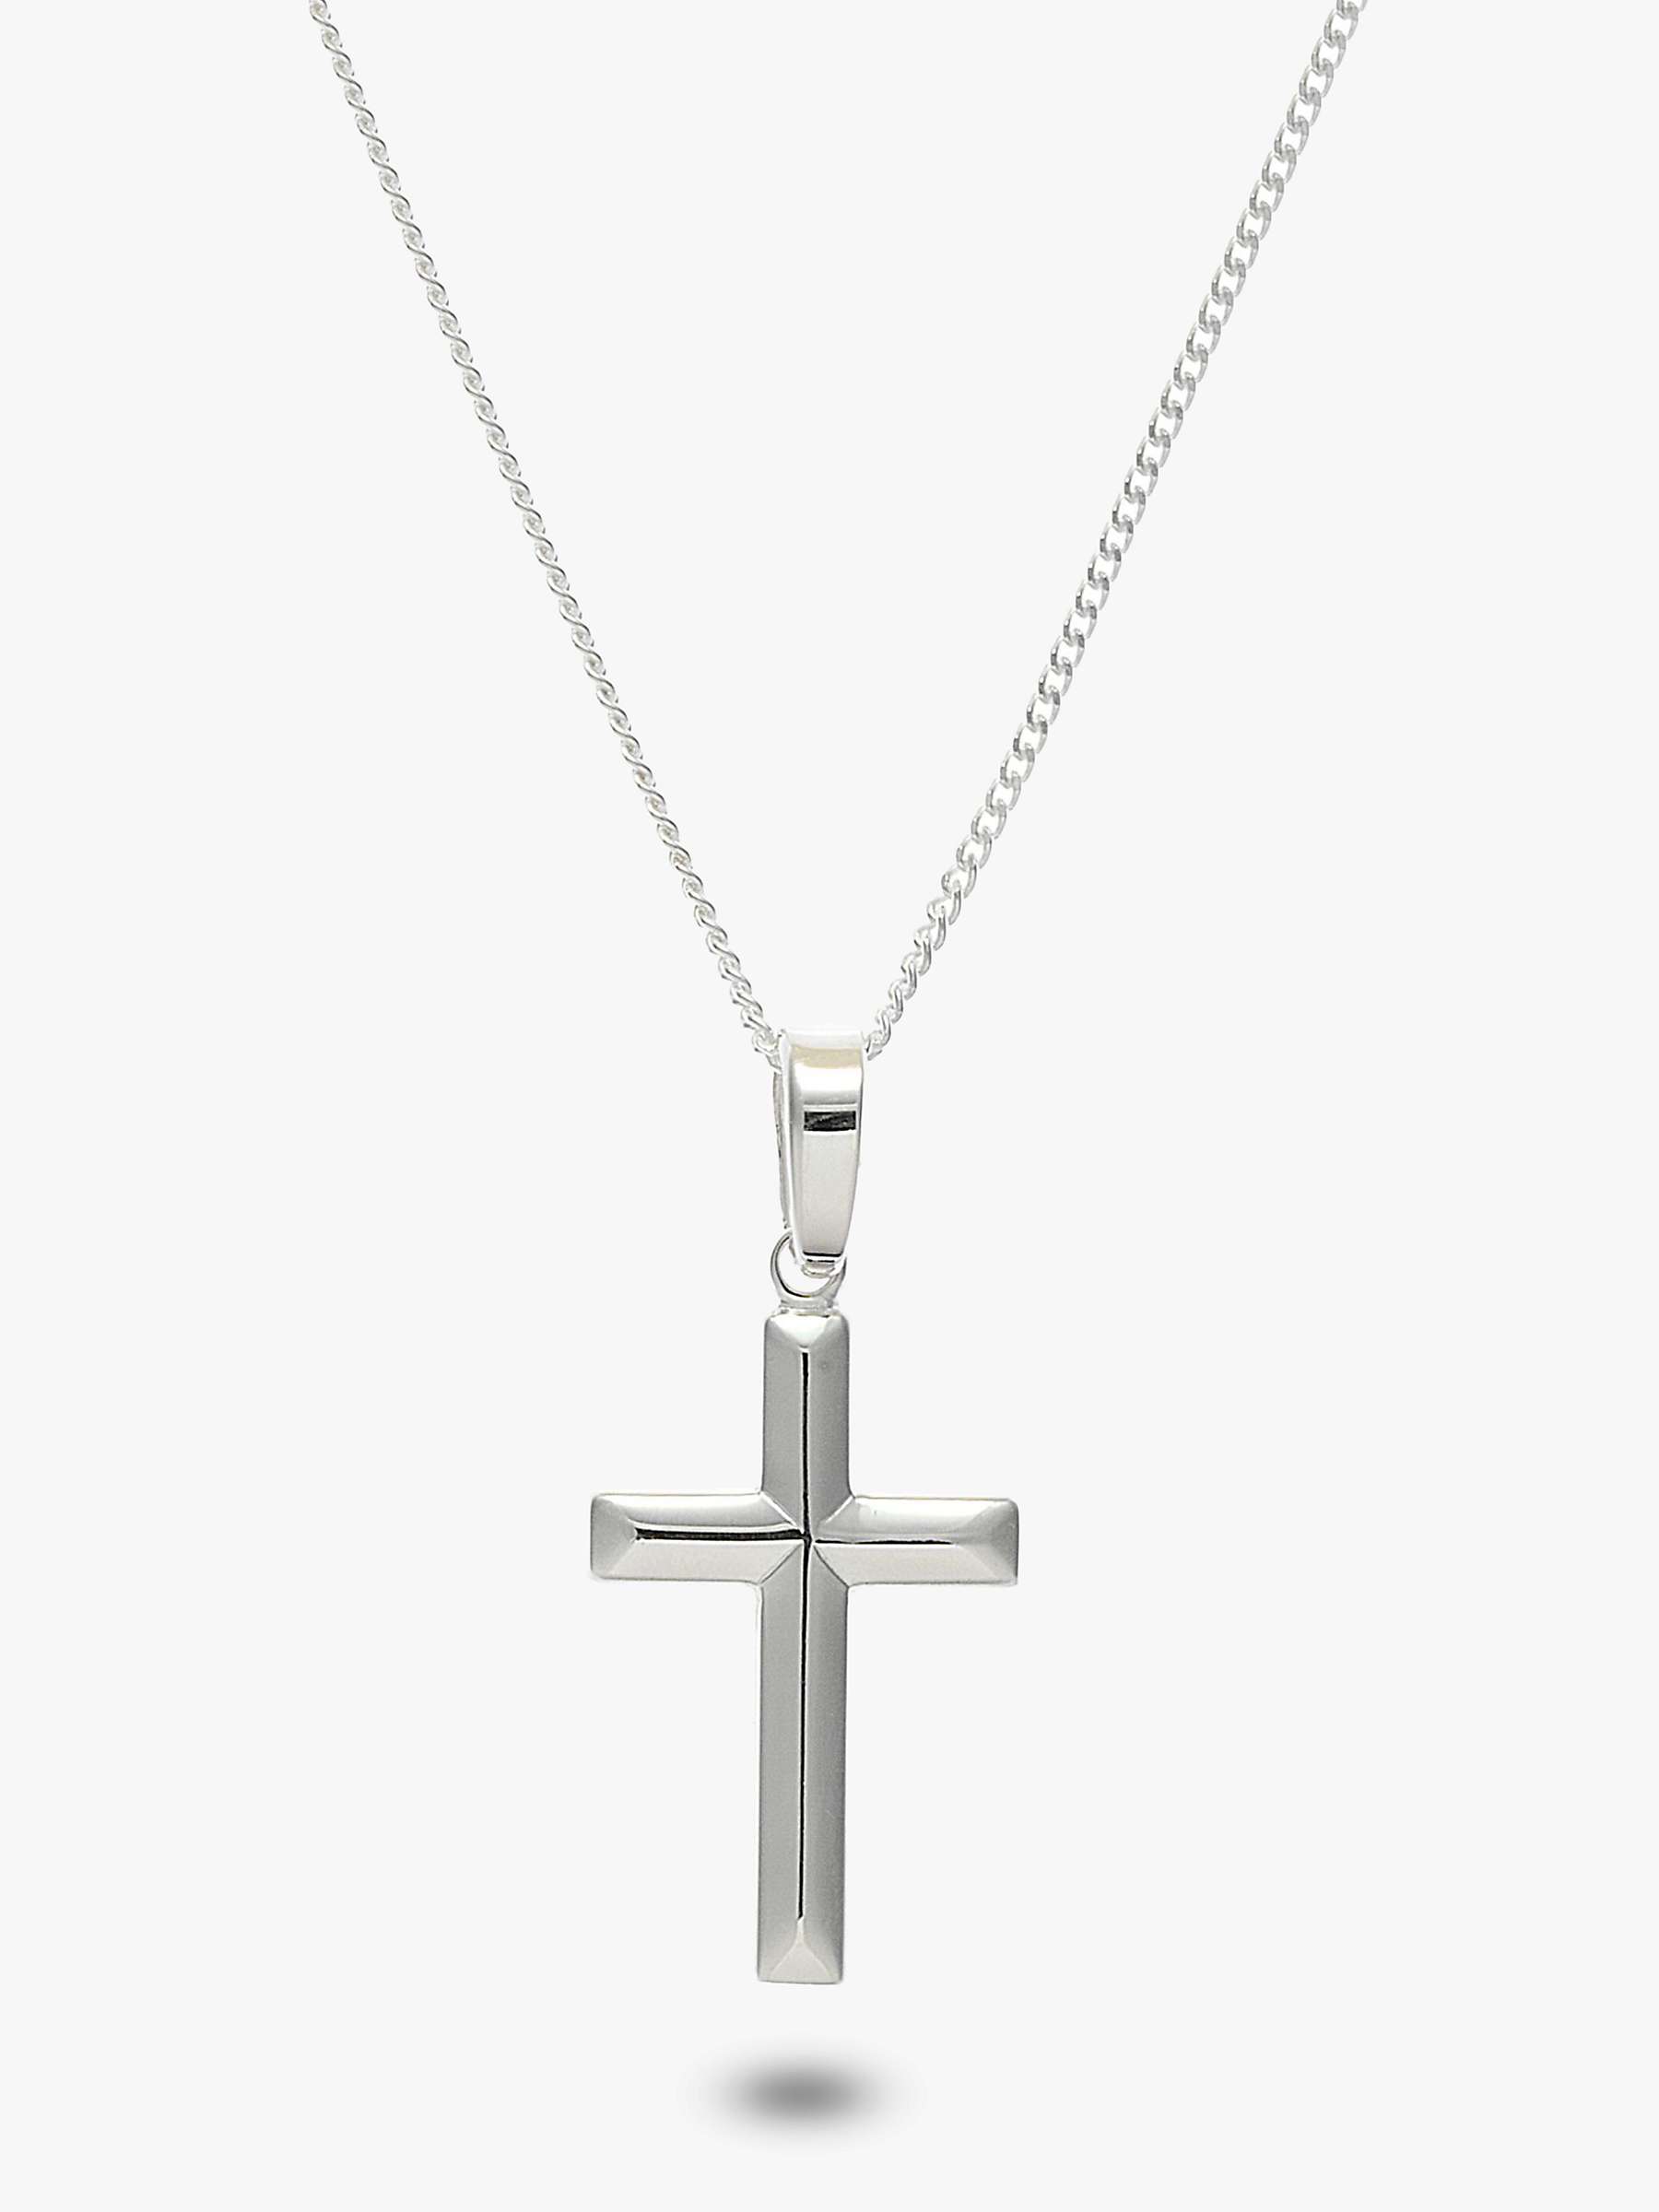 Buy Nina B Silver Polished Cross Pendant Necklace, Silver Online at johnlewis.com